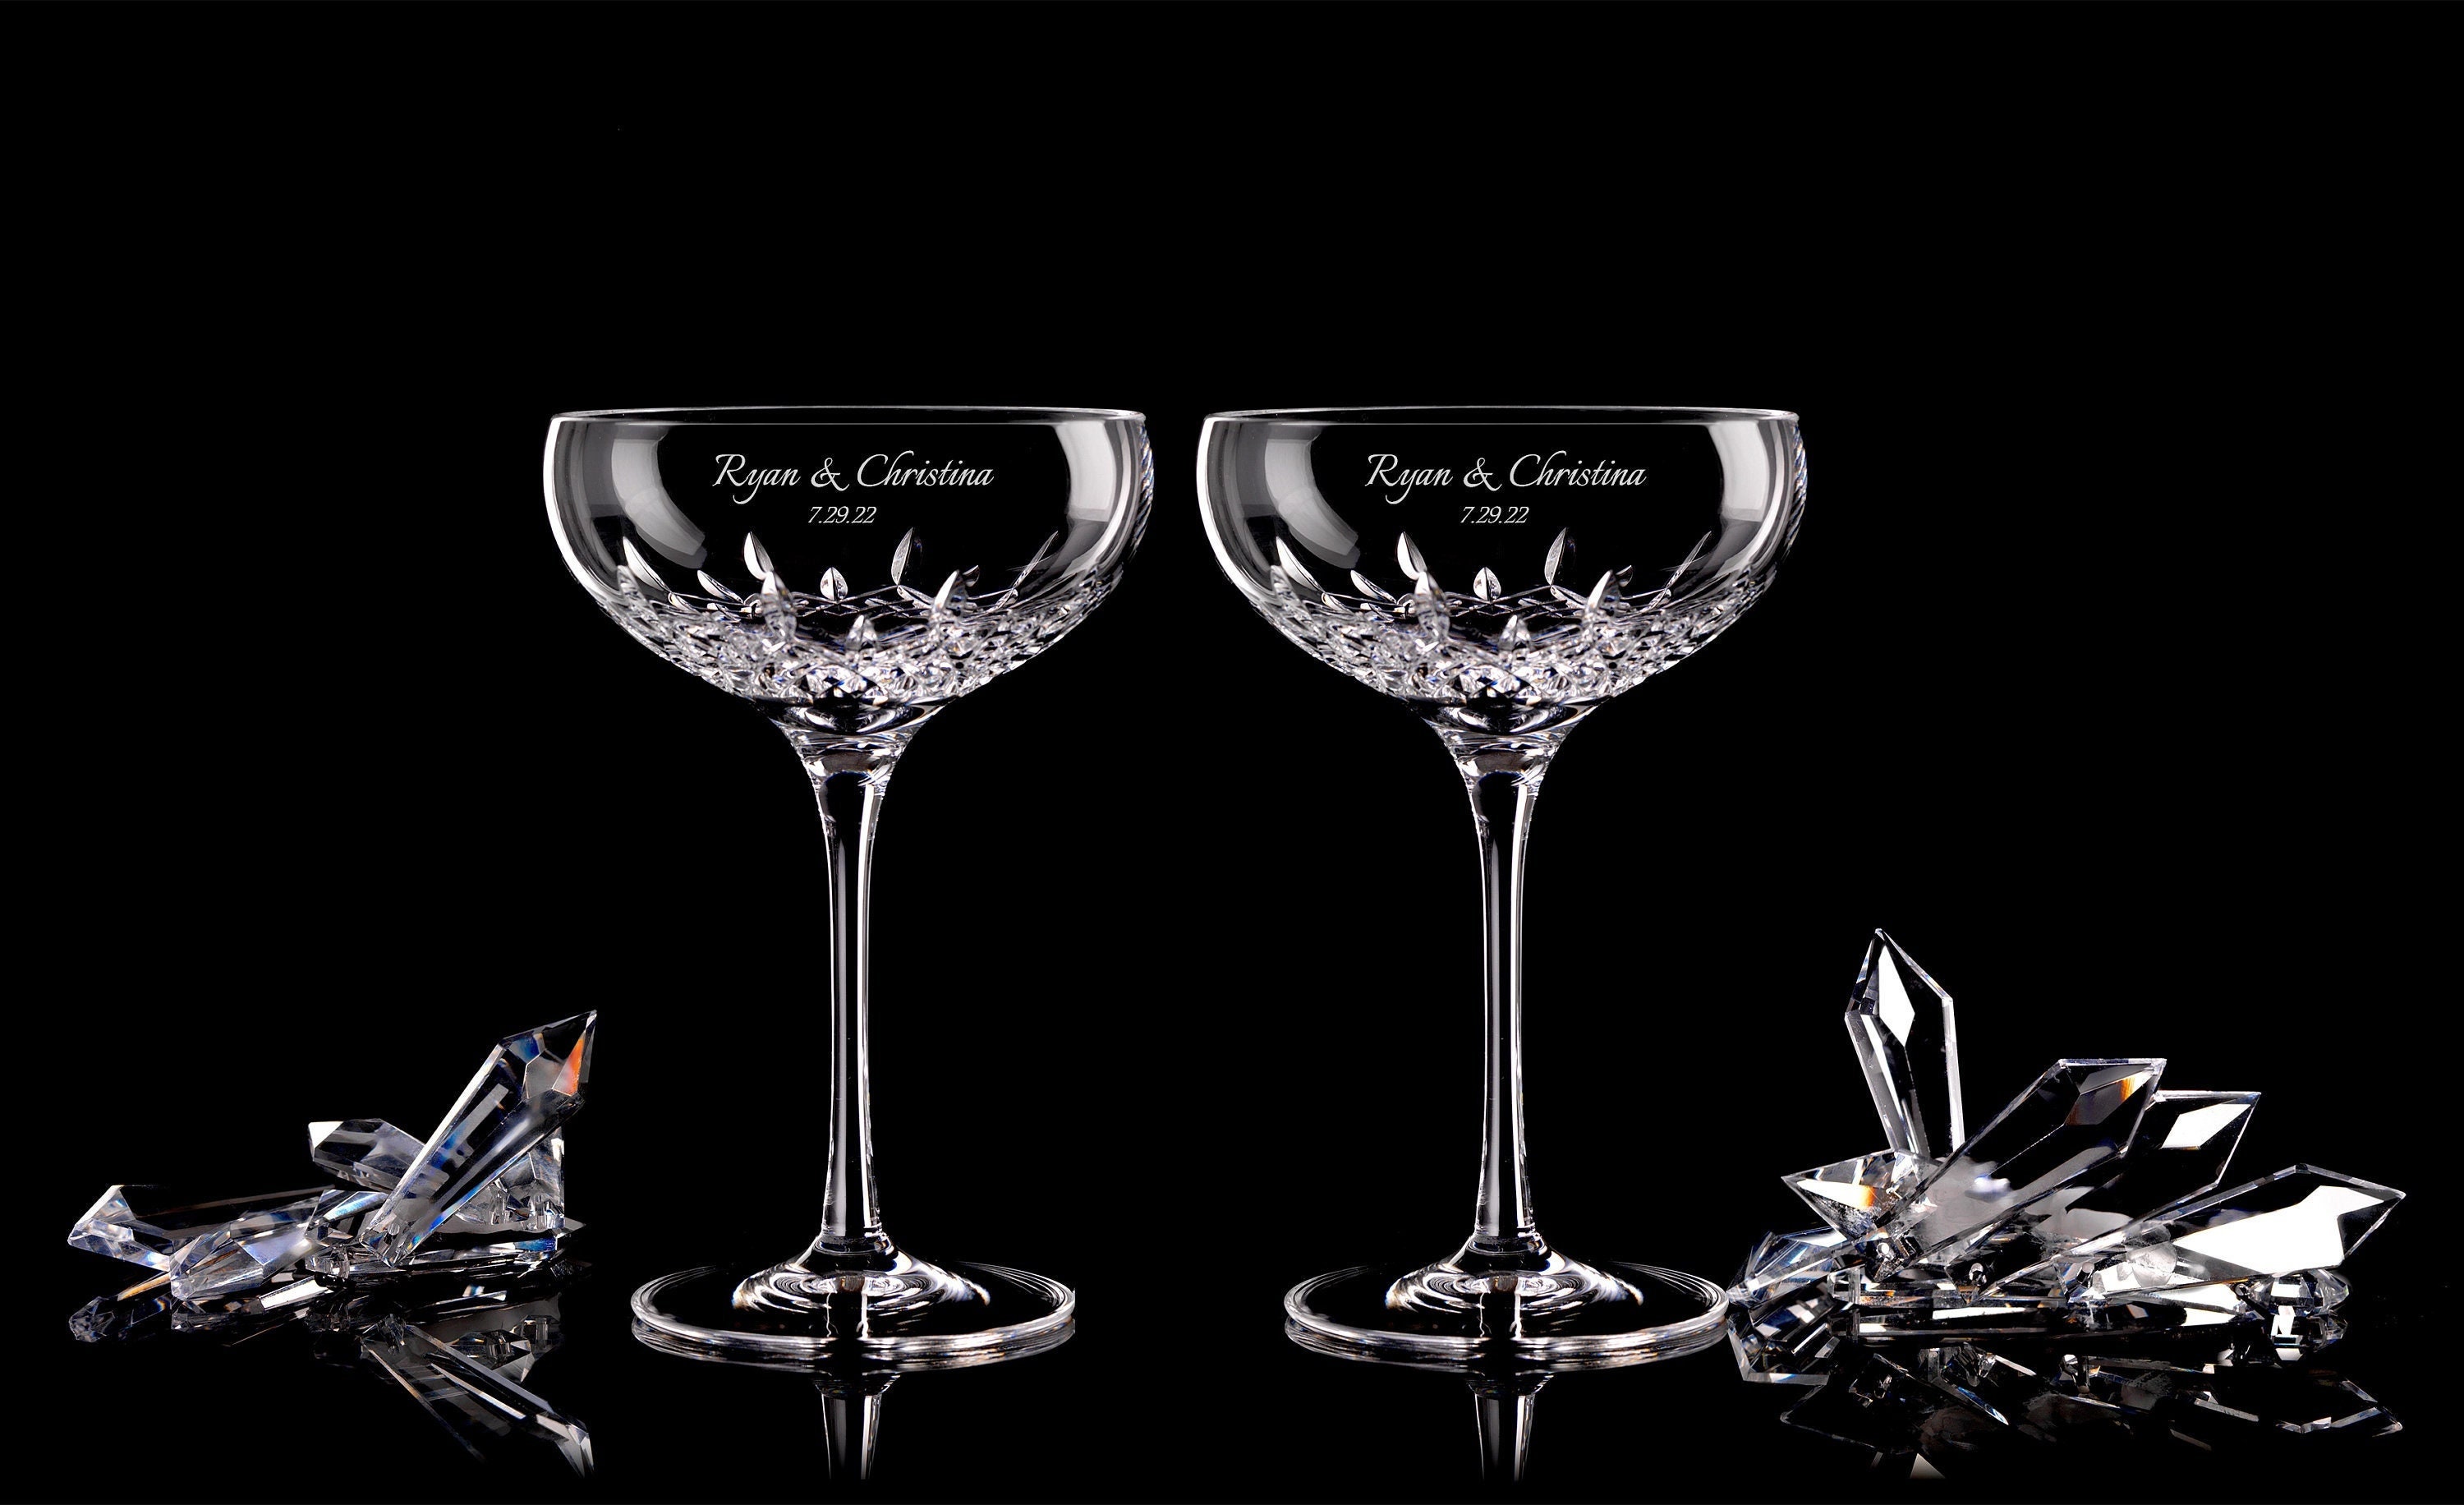 Waterford Crystal Lismore Essence Champagne Flute Pair